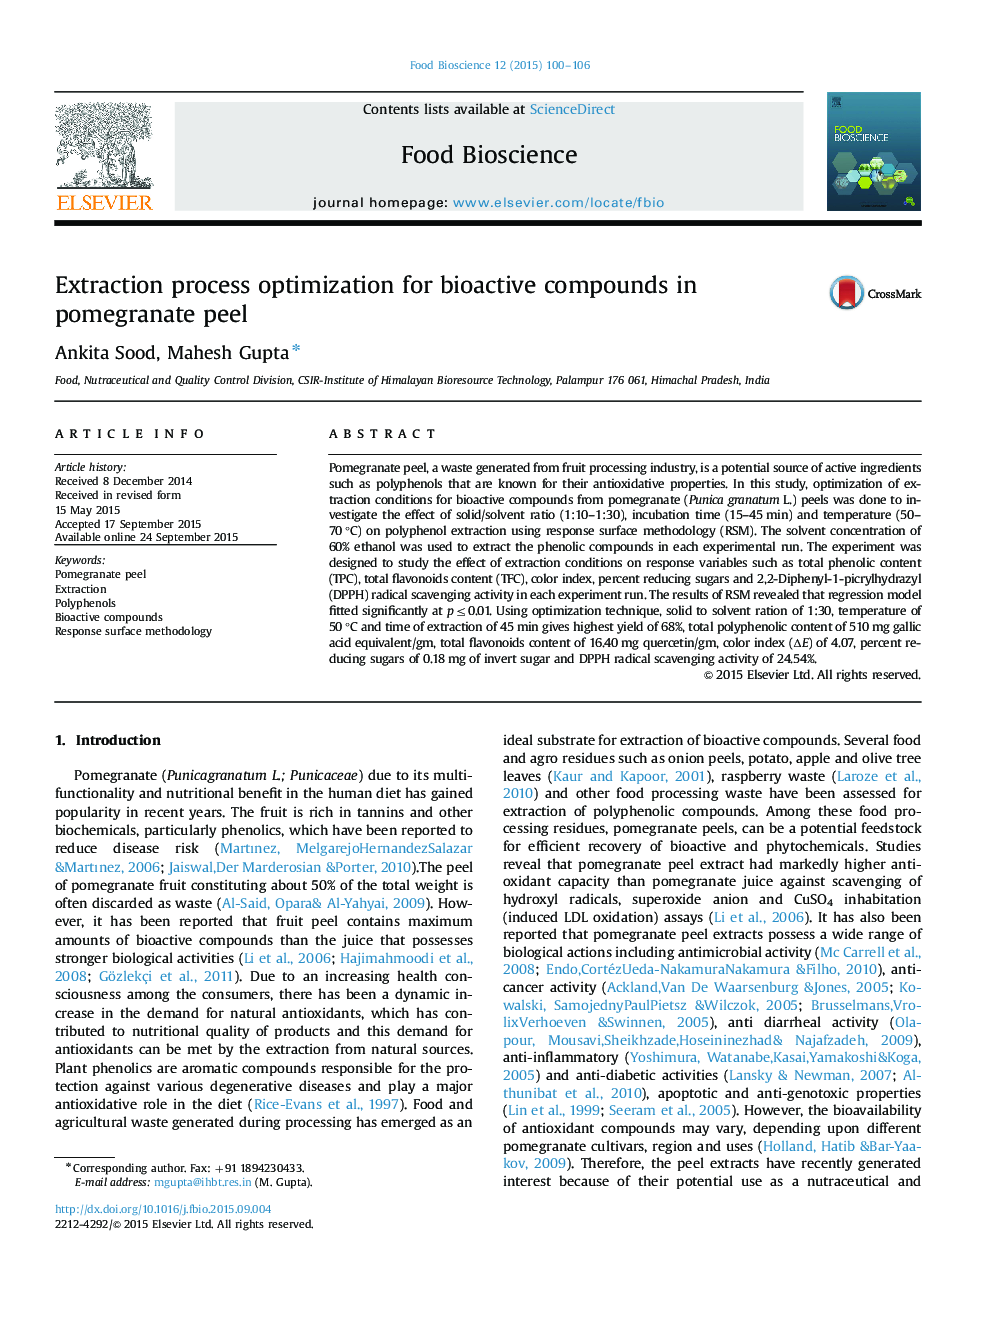 Extraction process optimization for bioactive compounds in pomegranate peel